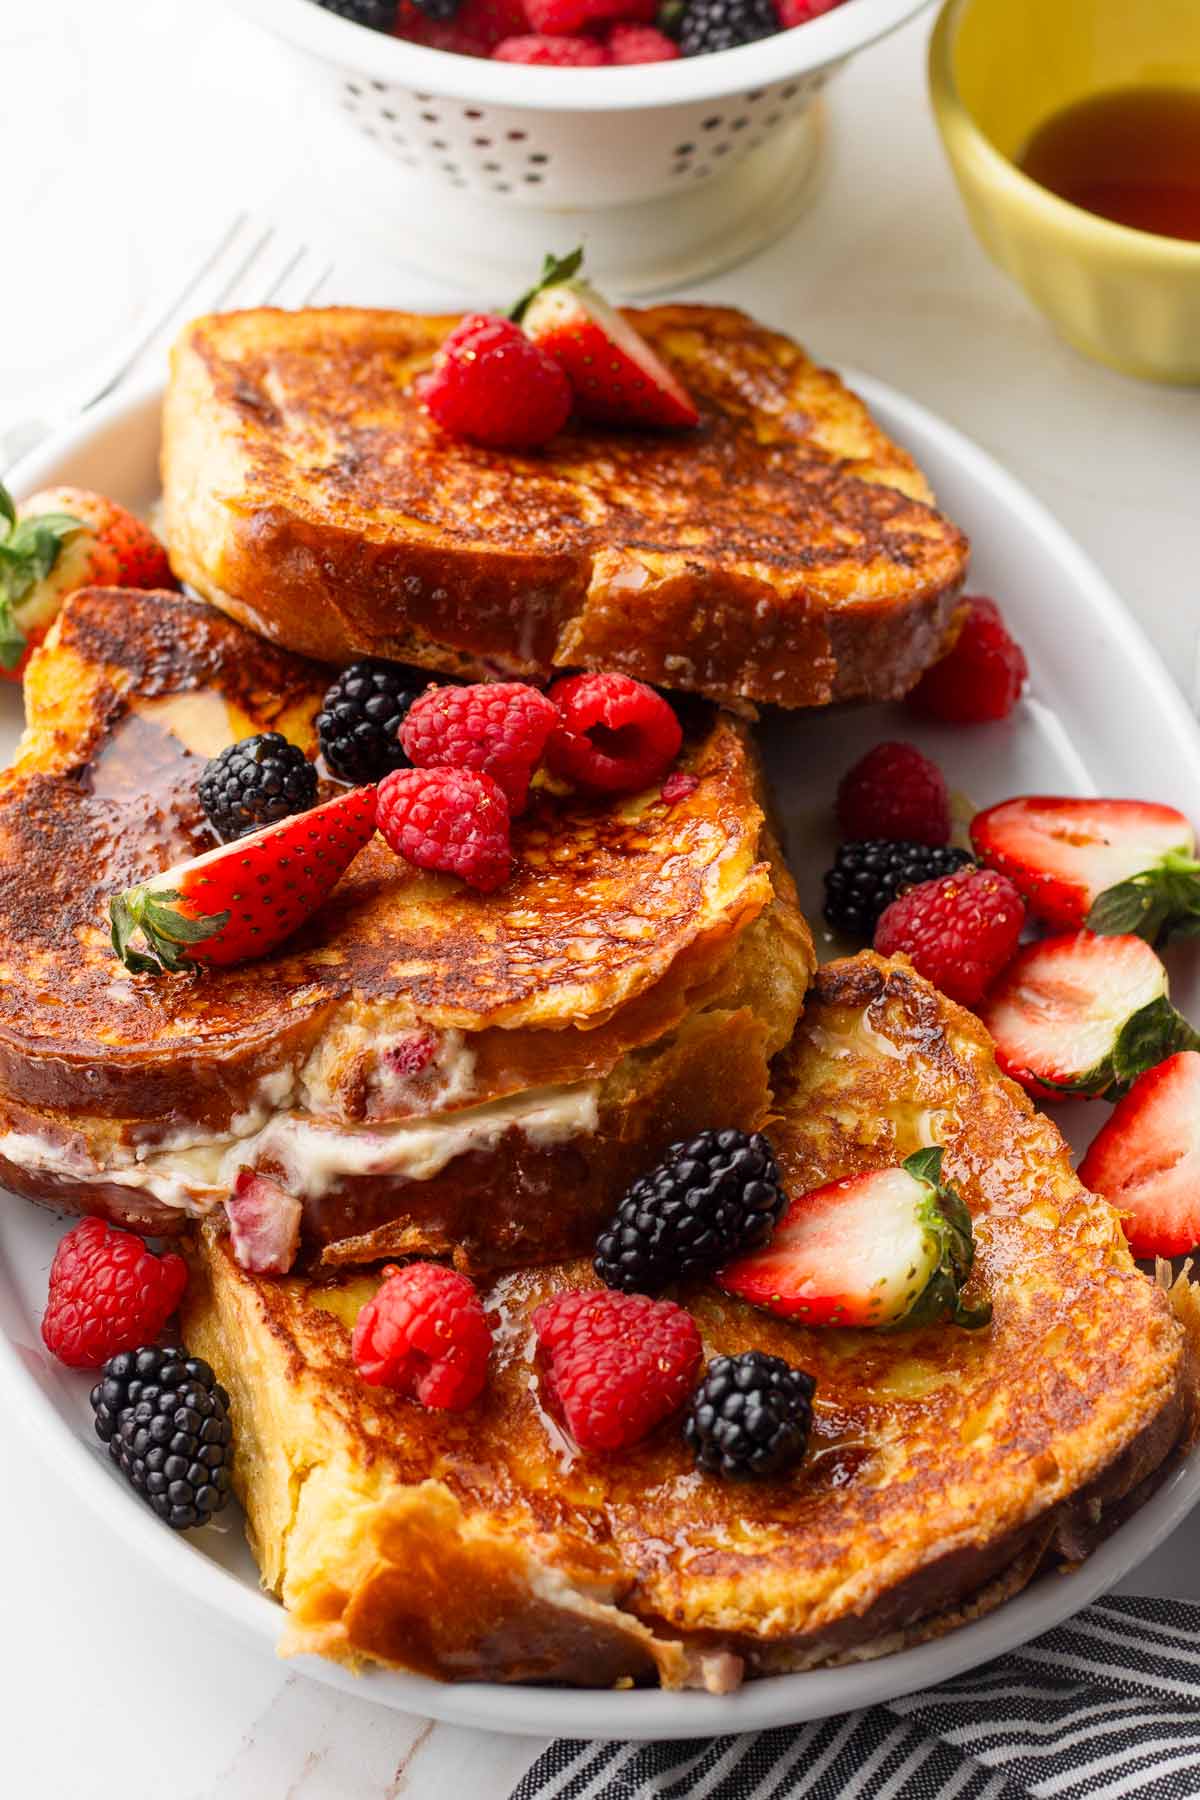 platter with three golden brown french toasts with berries